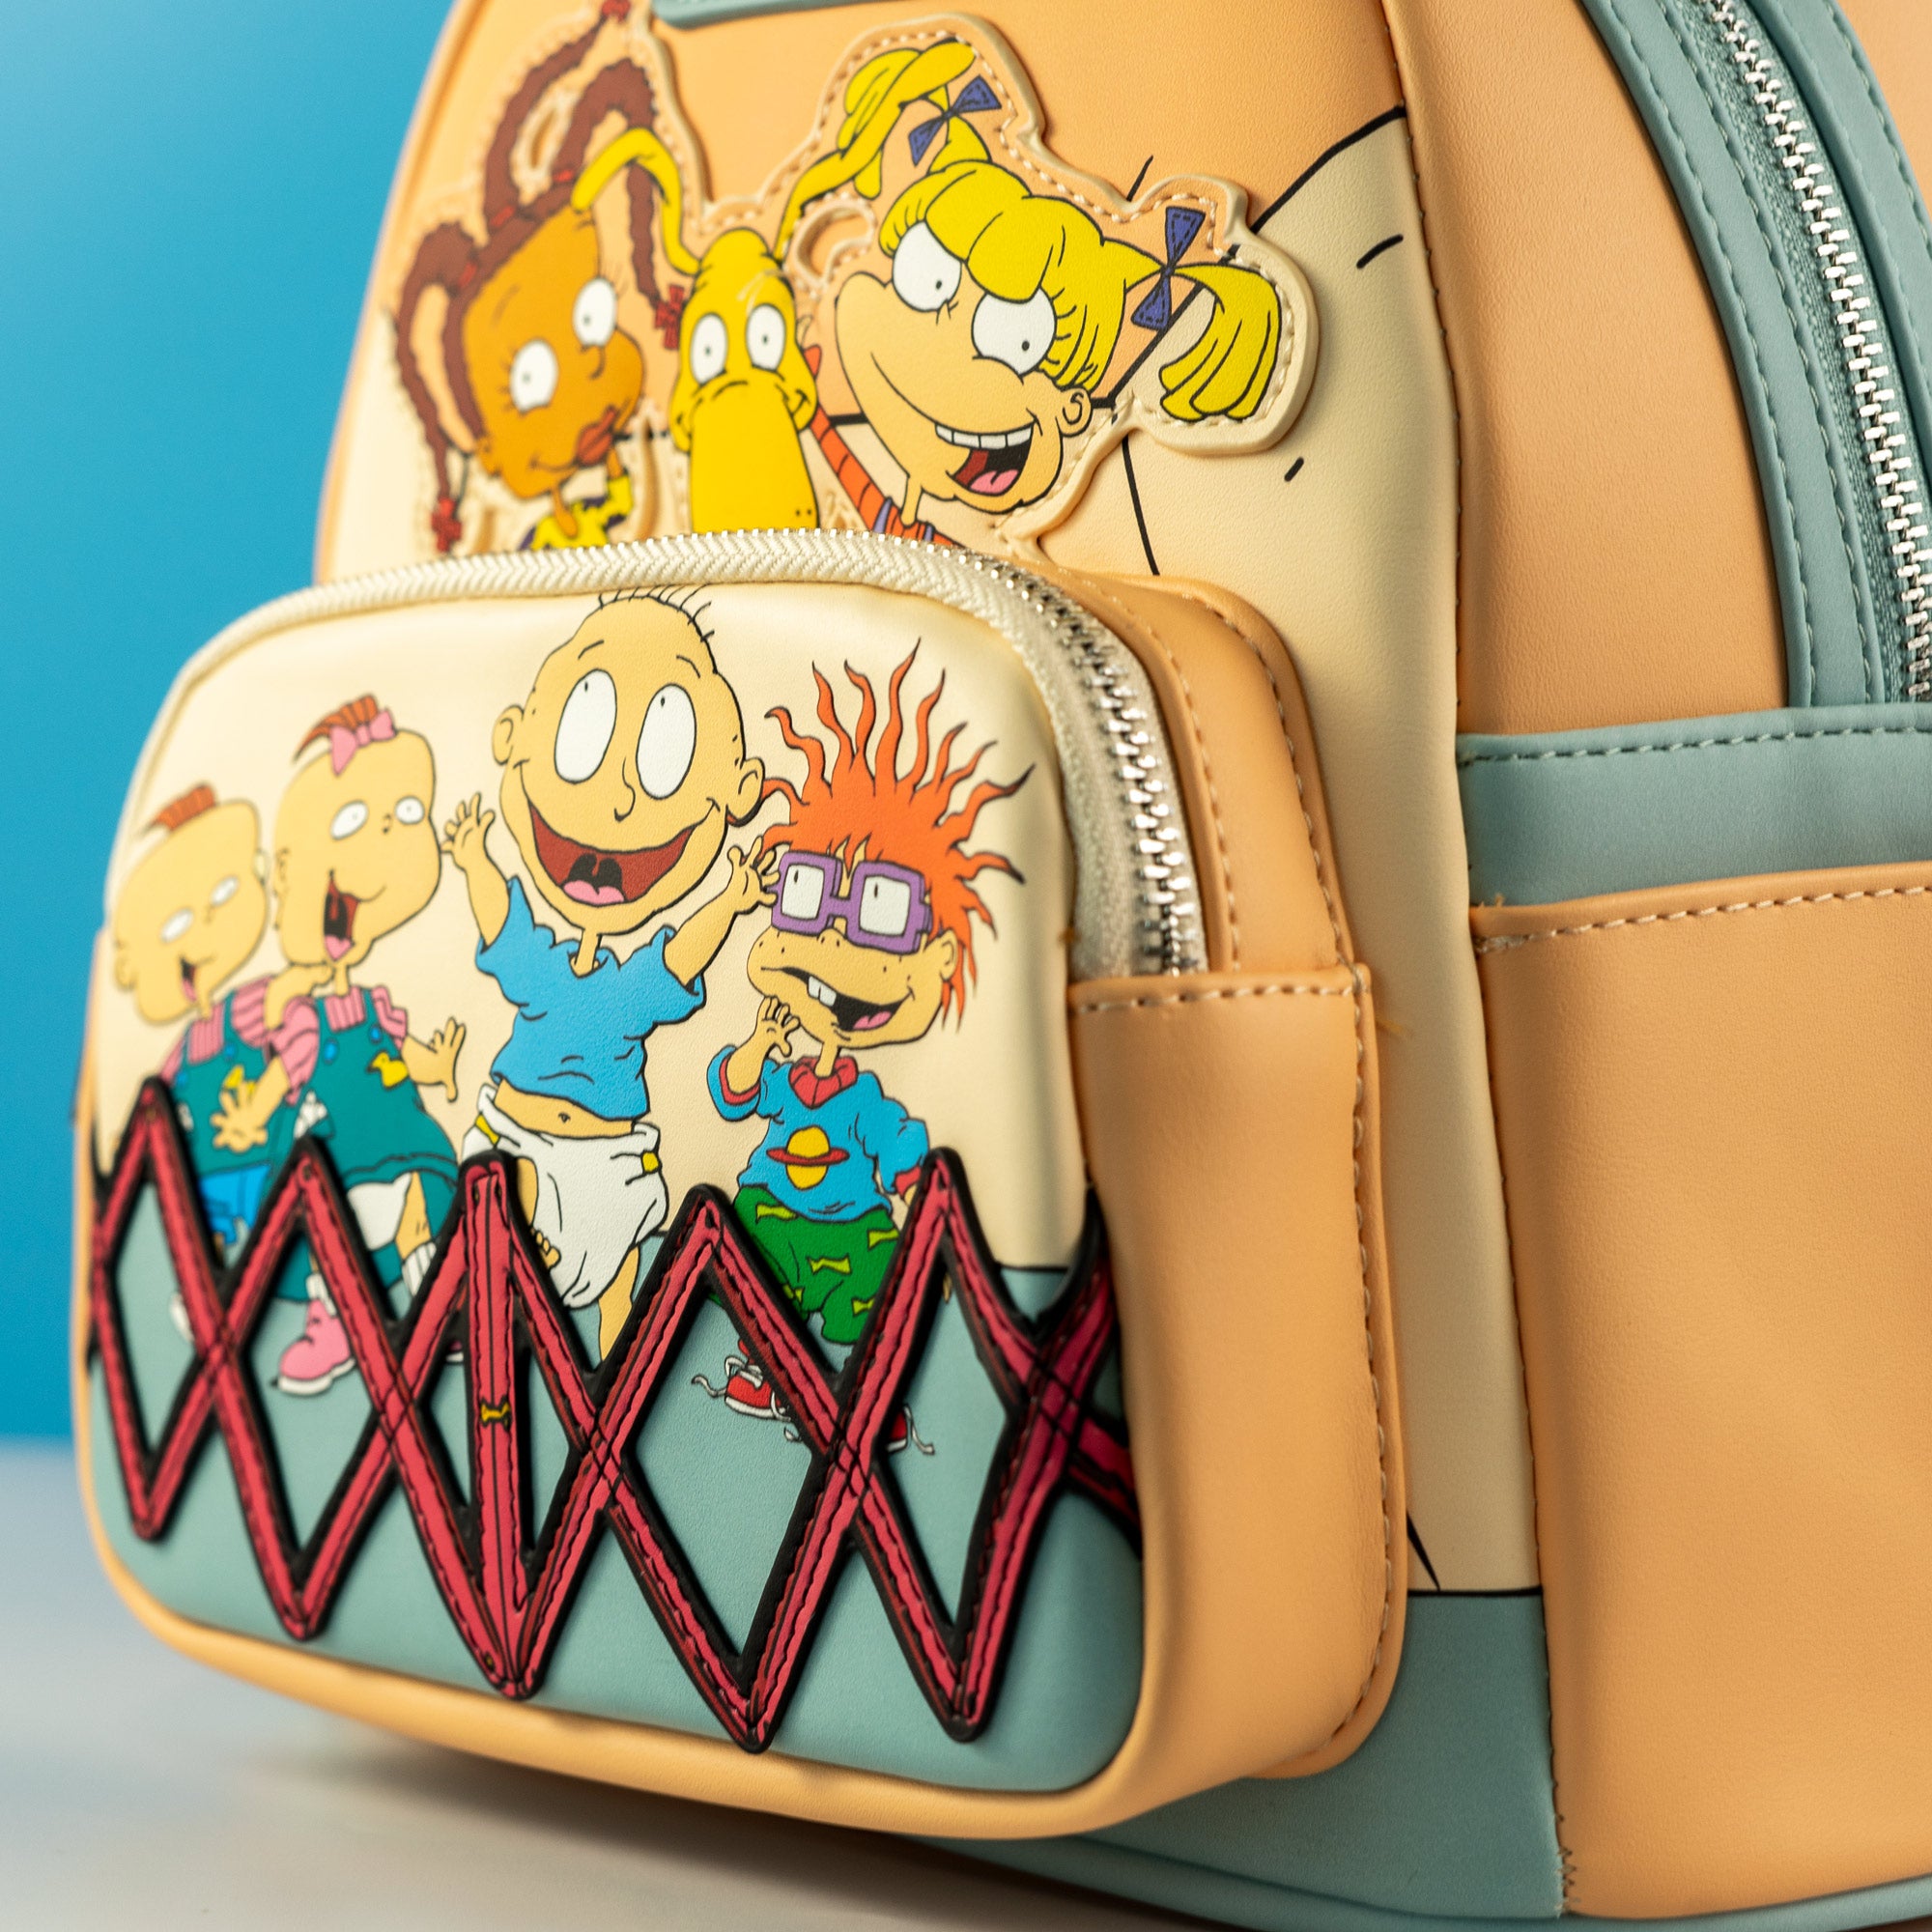 Loungefly x Nickelodeon Rugrats 30th Anniversary Mini Backpack